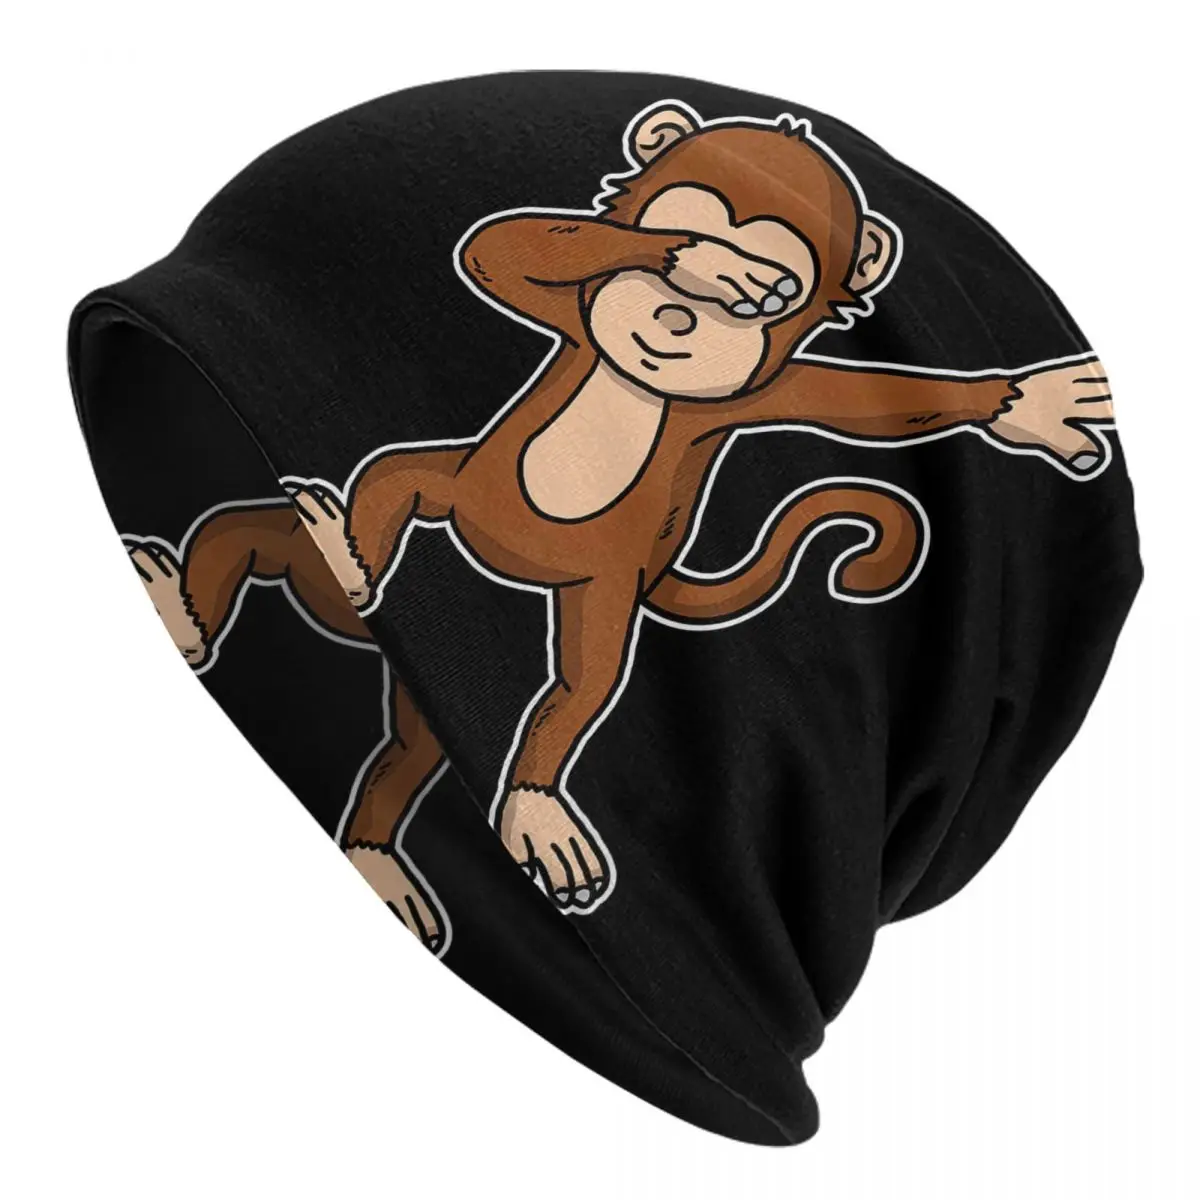 Funny Dabbing Monkey Dab Dance Ape Lover Gift Adult Men's Women's Knit Hat Keep warm winter Funny knitted hat